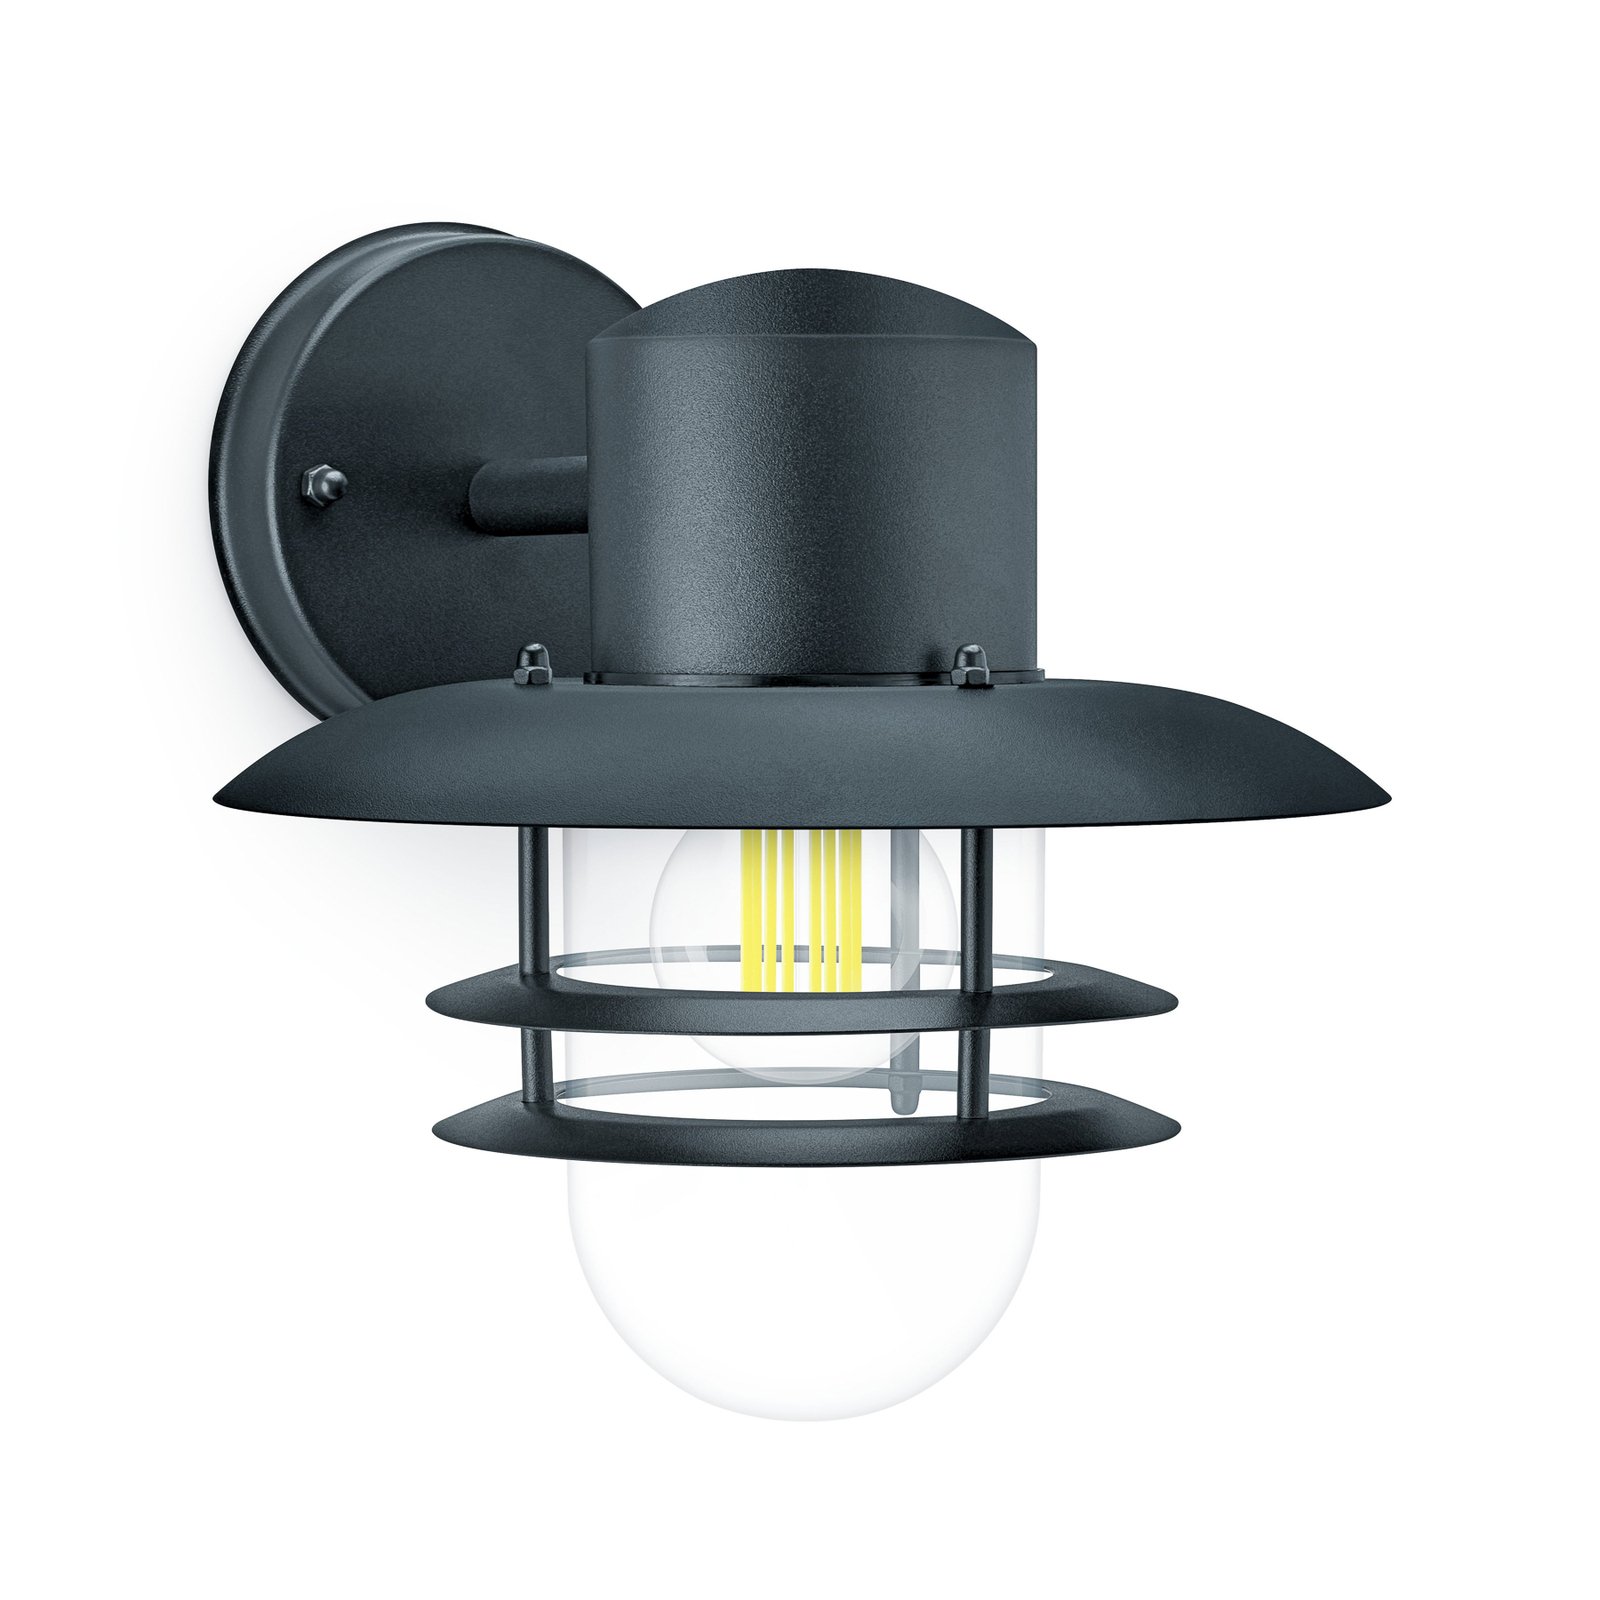 Philips outdoor wall light Inyma